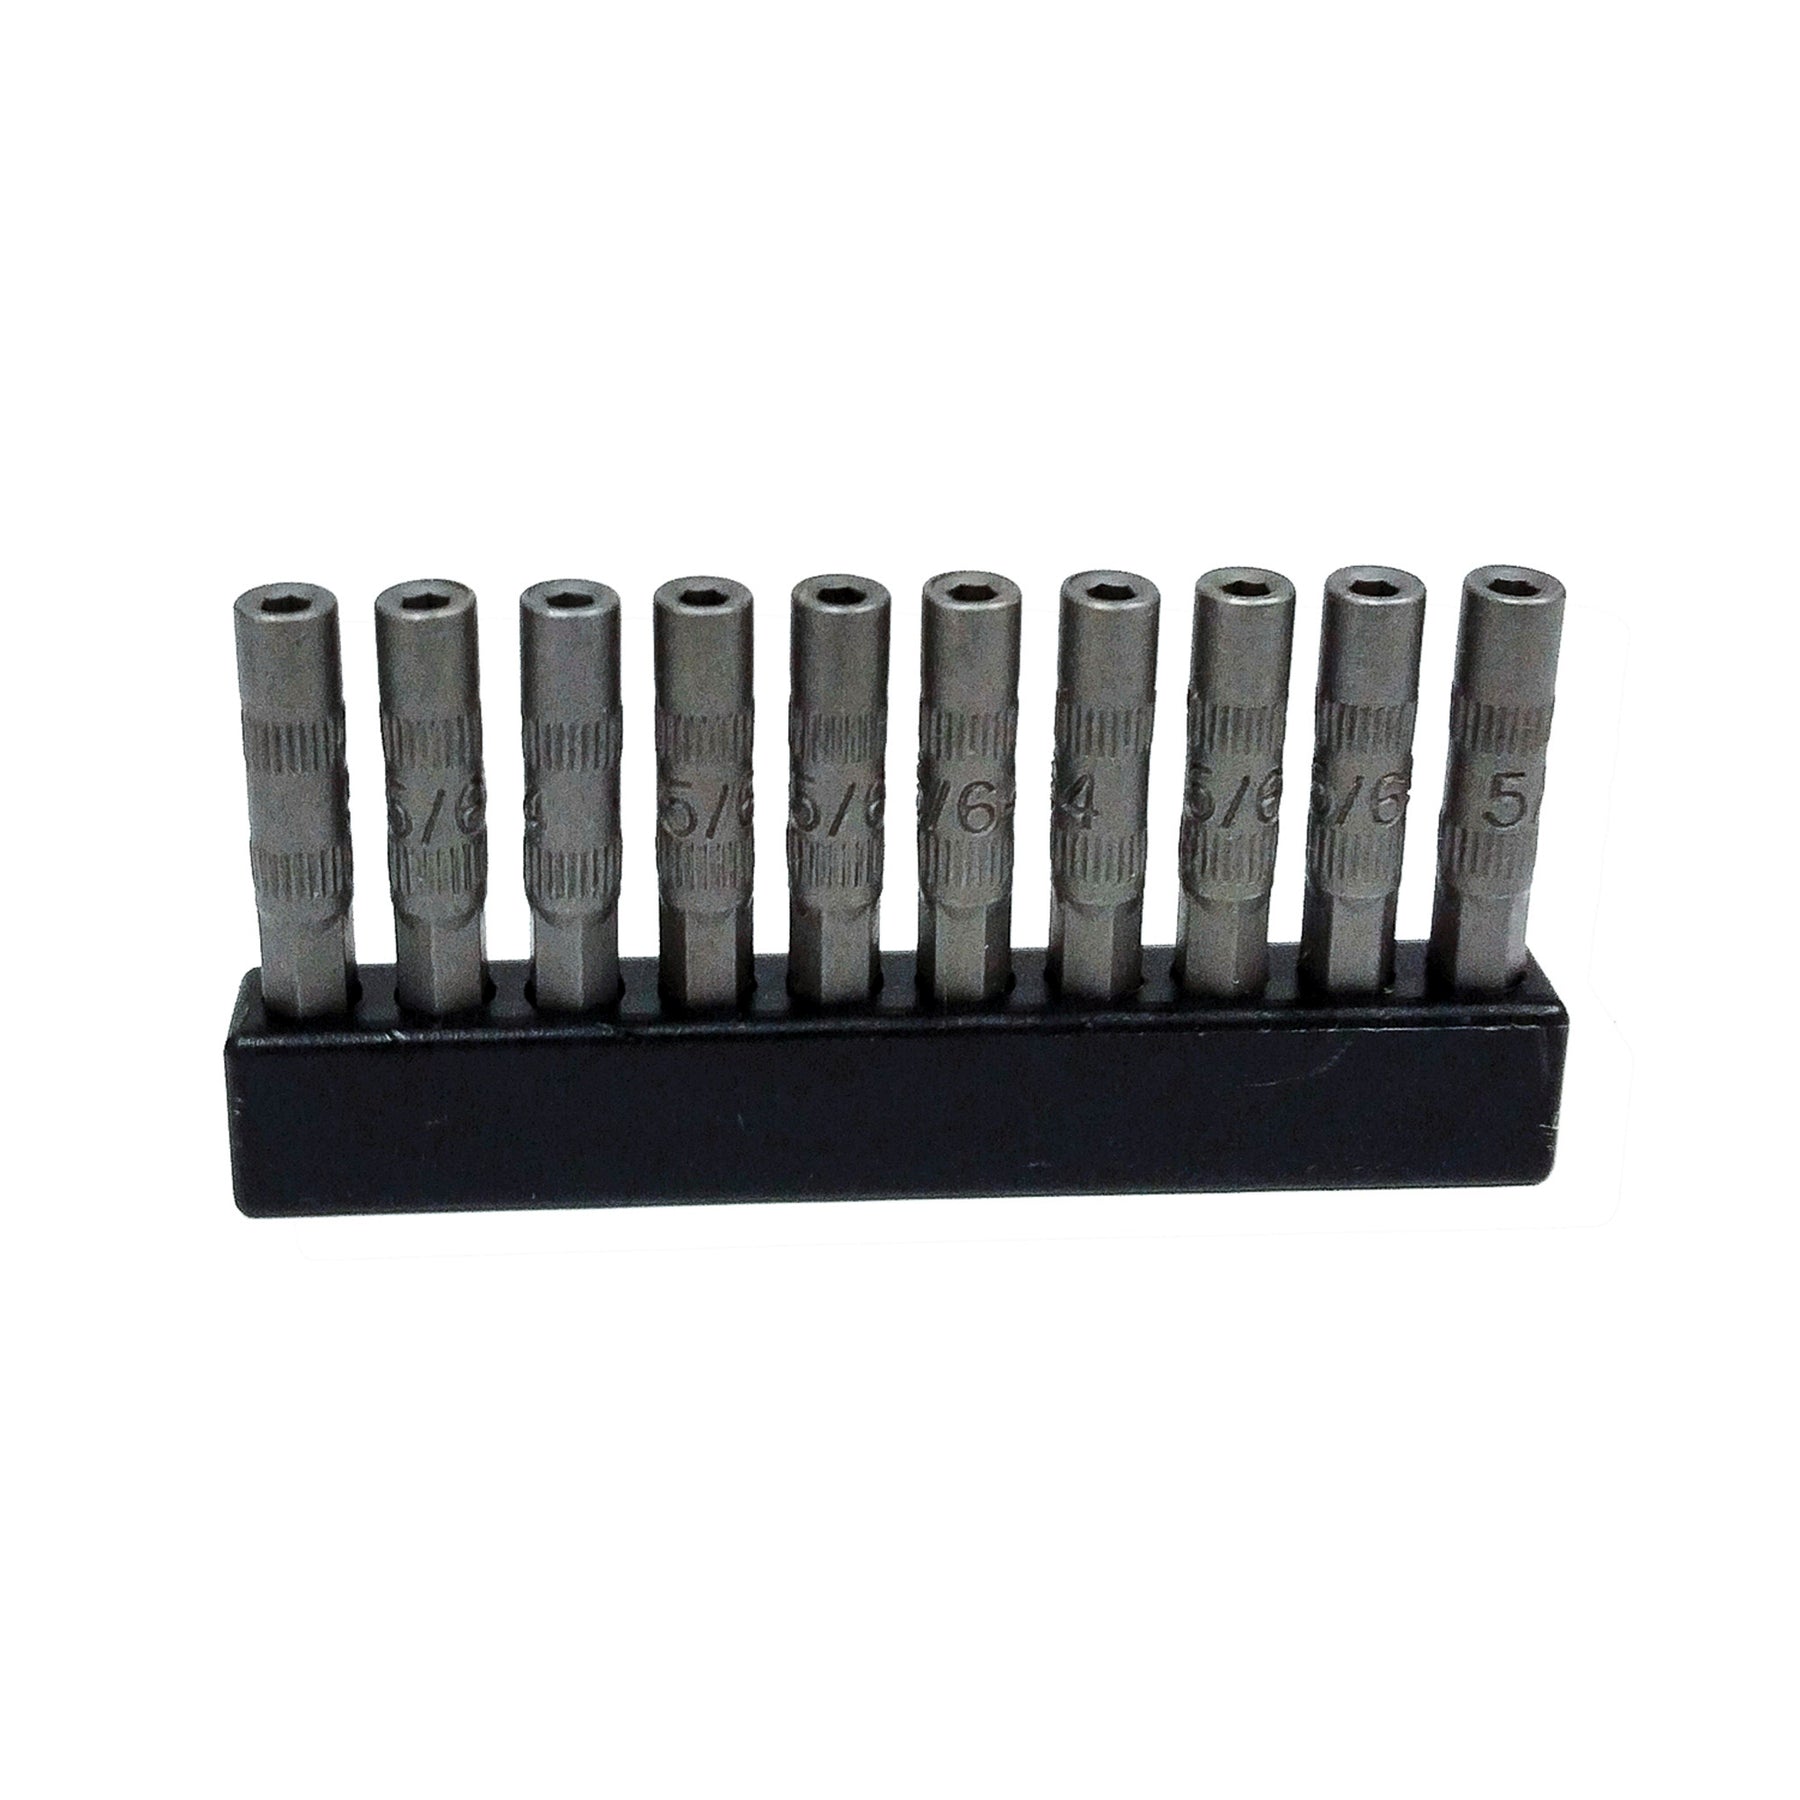 Wiha 75644 System 4 Nut Setters 4mm 5/64" x 30mm - 10 Pack